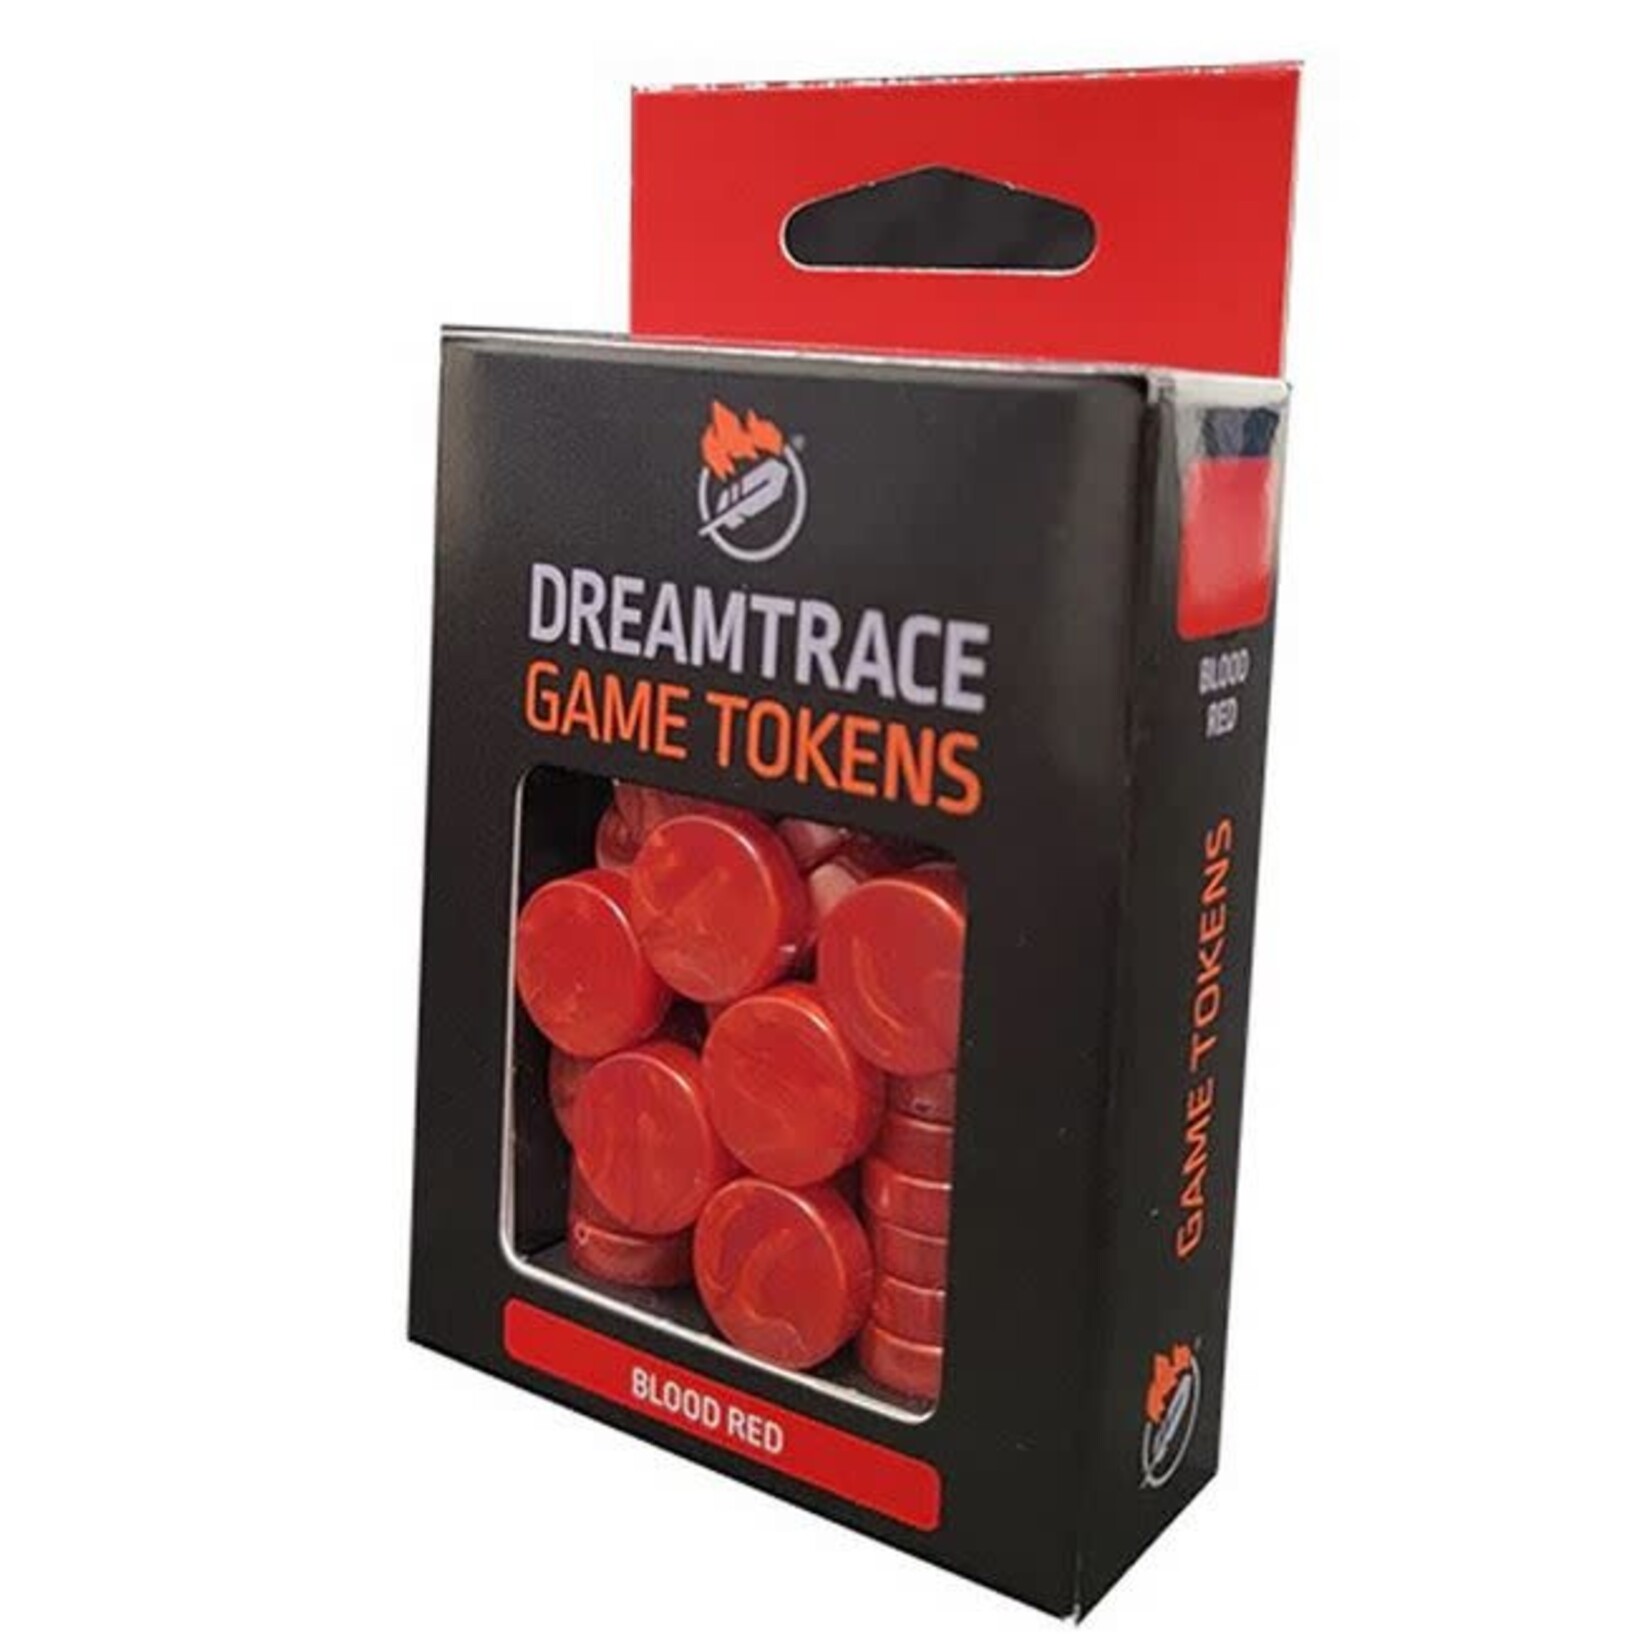 Dreamtrace Game Tokens: Blood Red